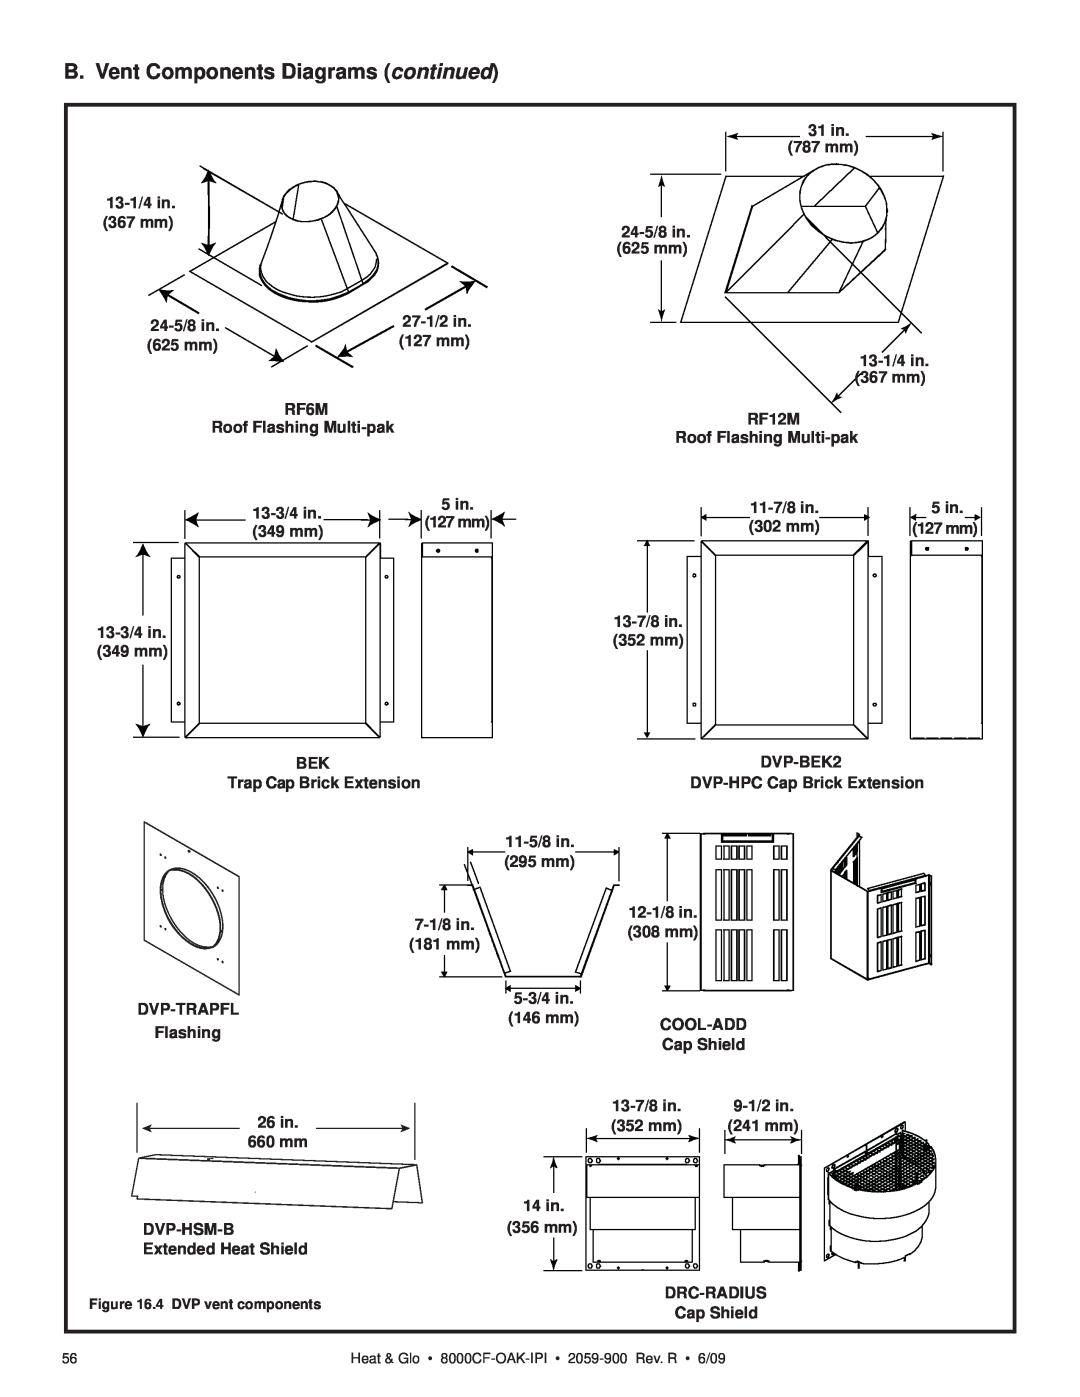 Heat & Glo LifeStyle 8000CFLP-OAKIPI B. Vent Components Diagrams continued, 31 in, 787 mm, 13-1/4in, 367 mm, 24-5/8in 